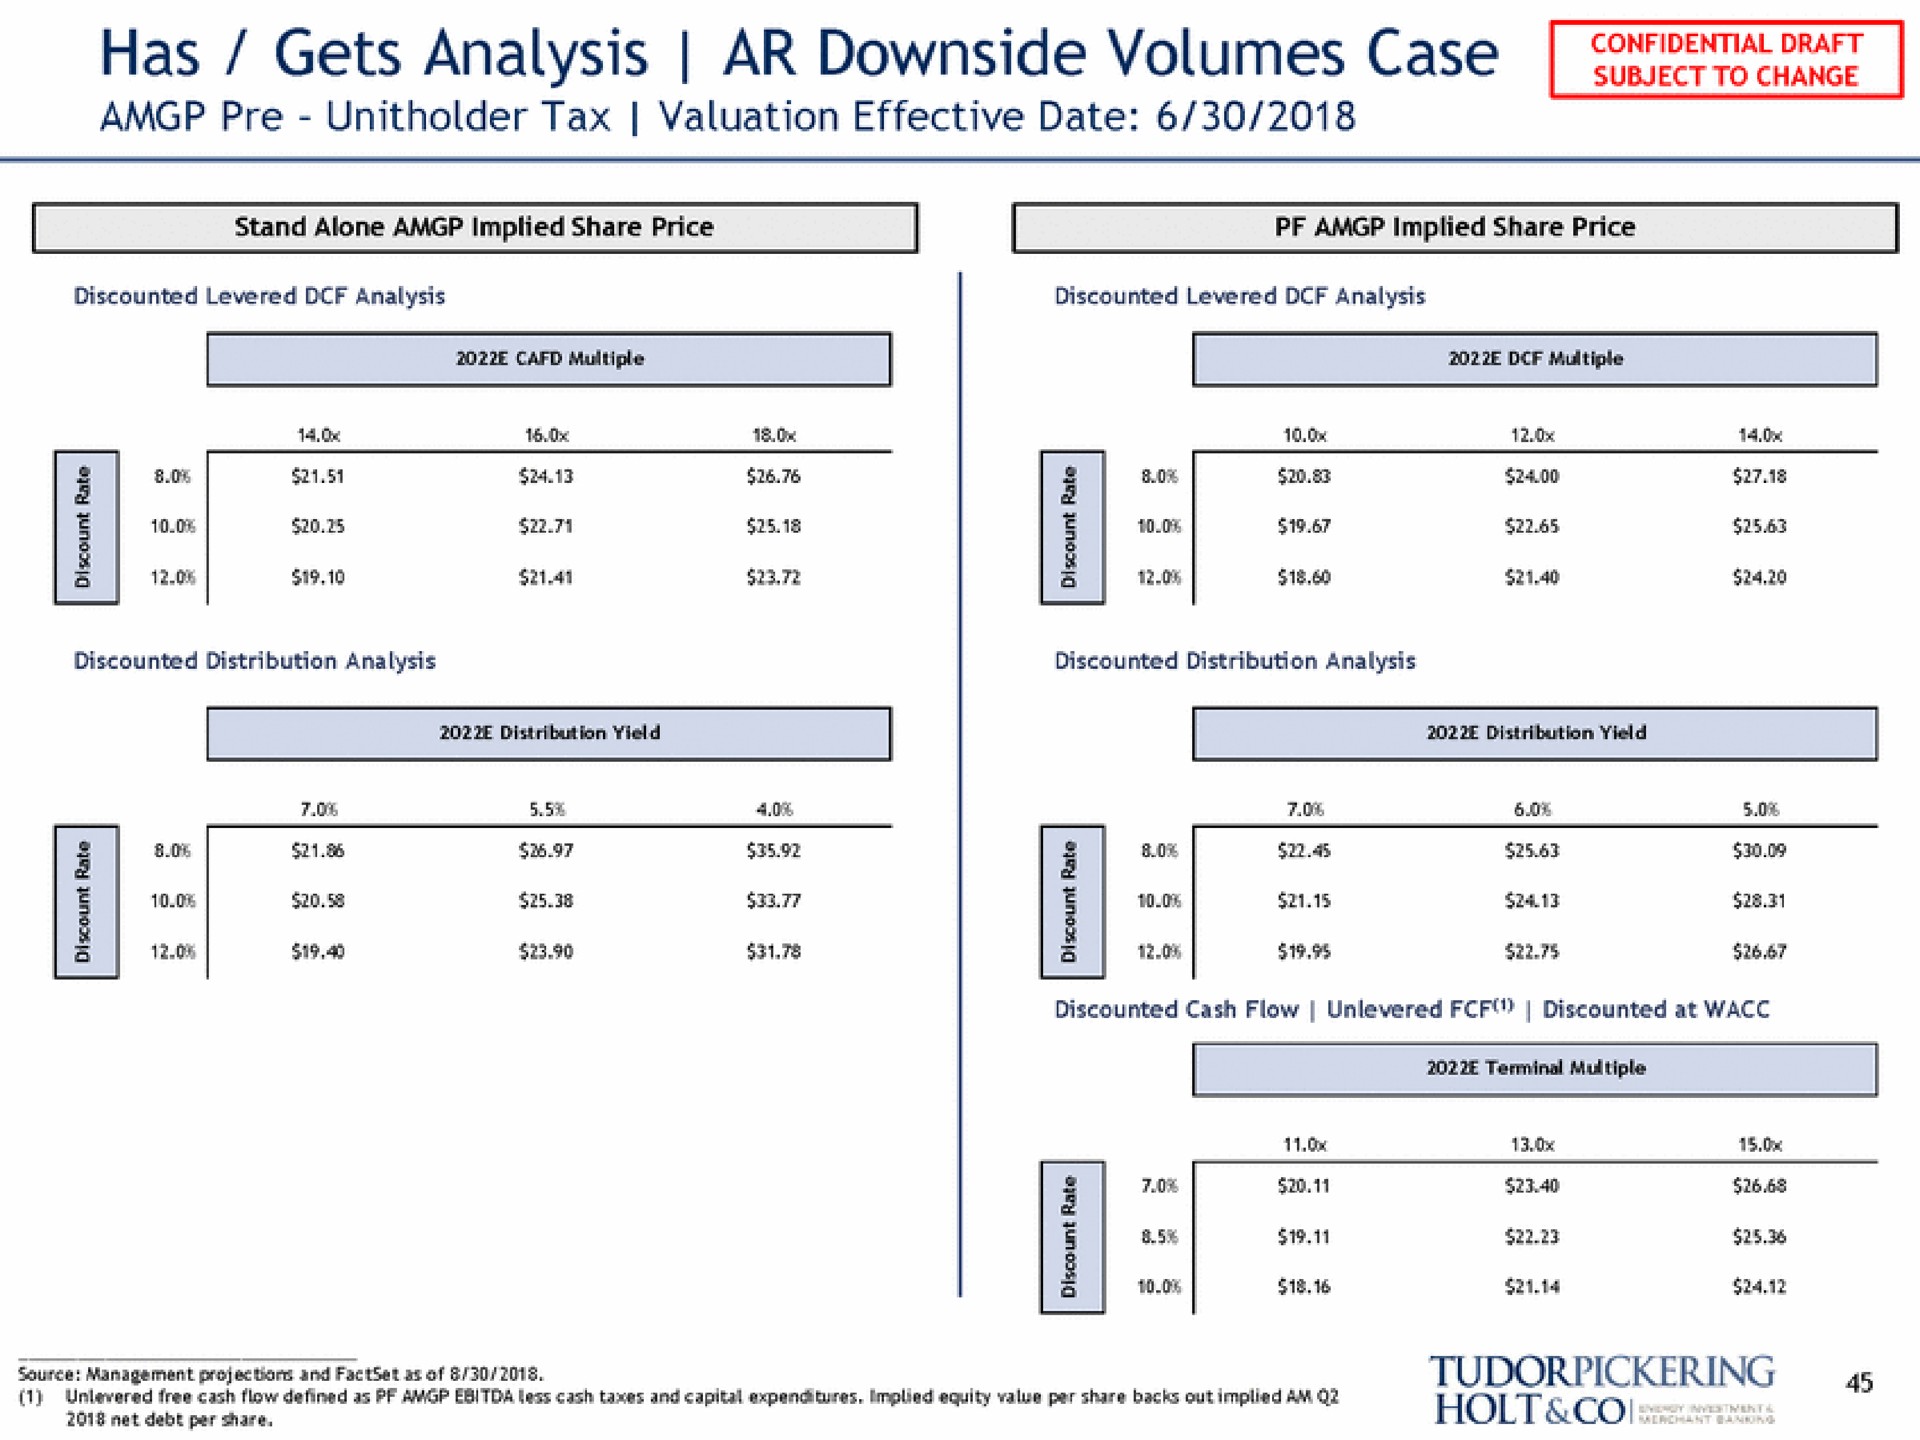 has gets analysis downside volumes case subject to change | Tudor, Pickering, Holt & Co